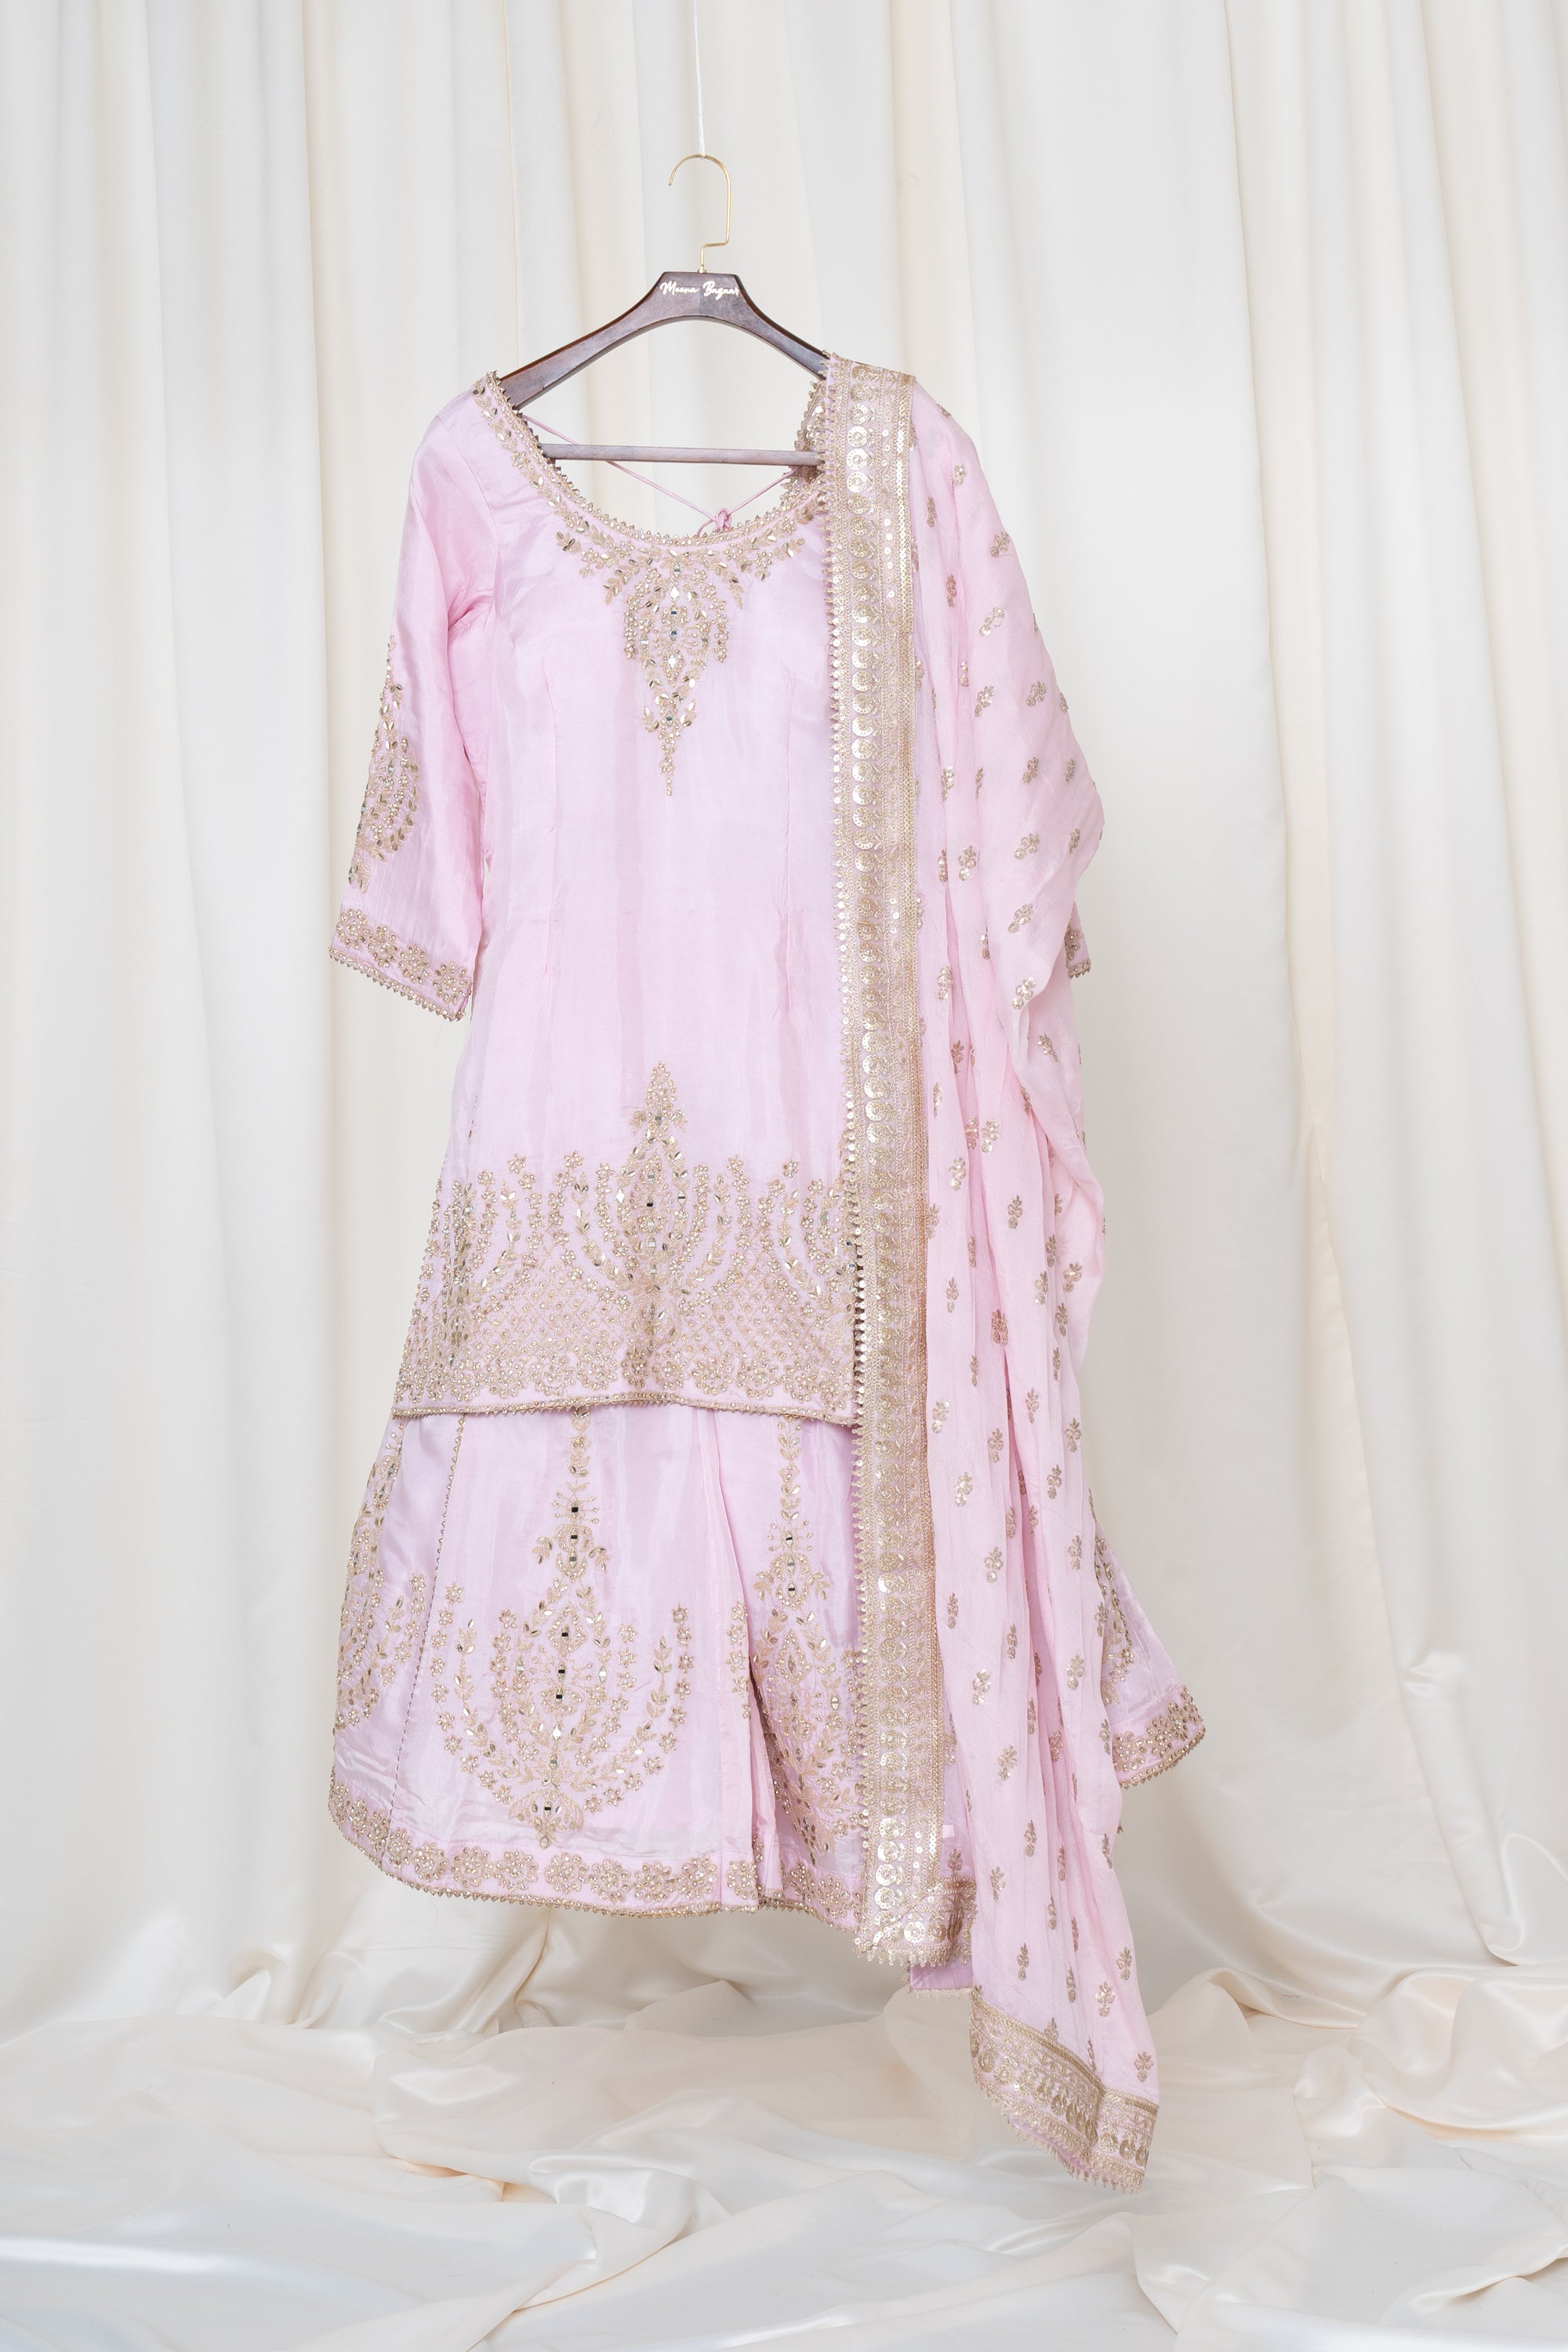 Most Loved Sharara Suit One